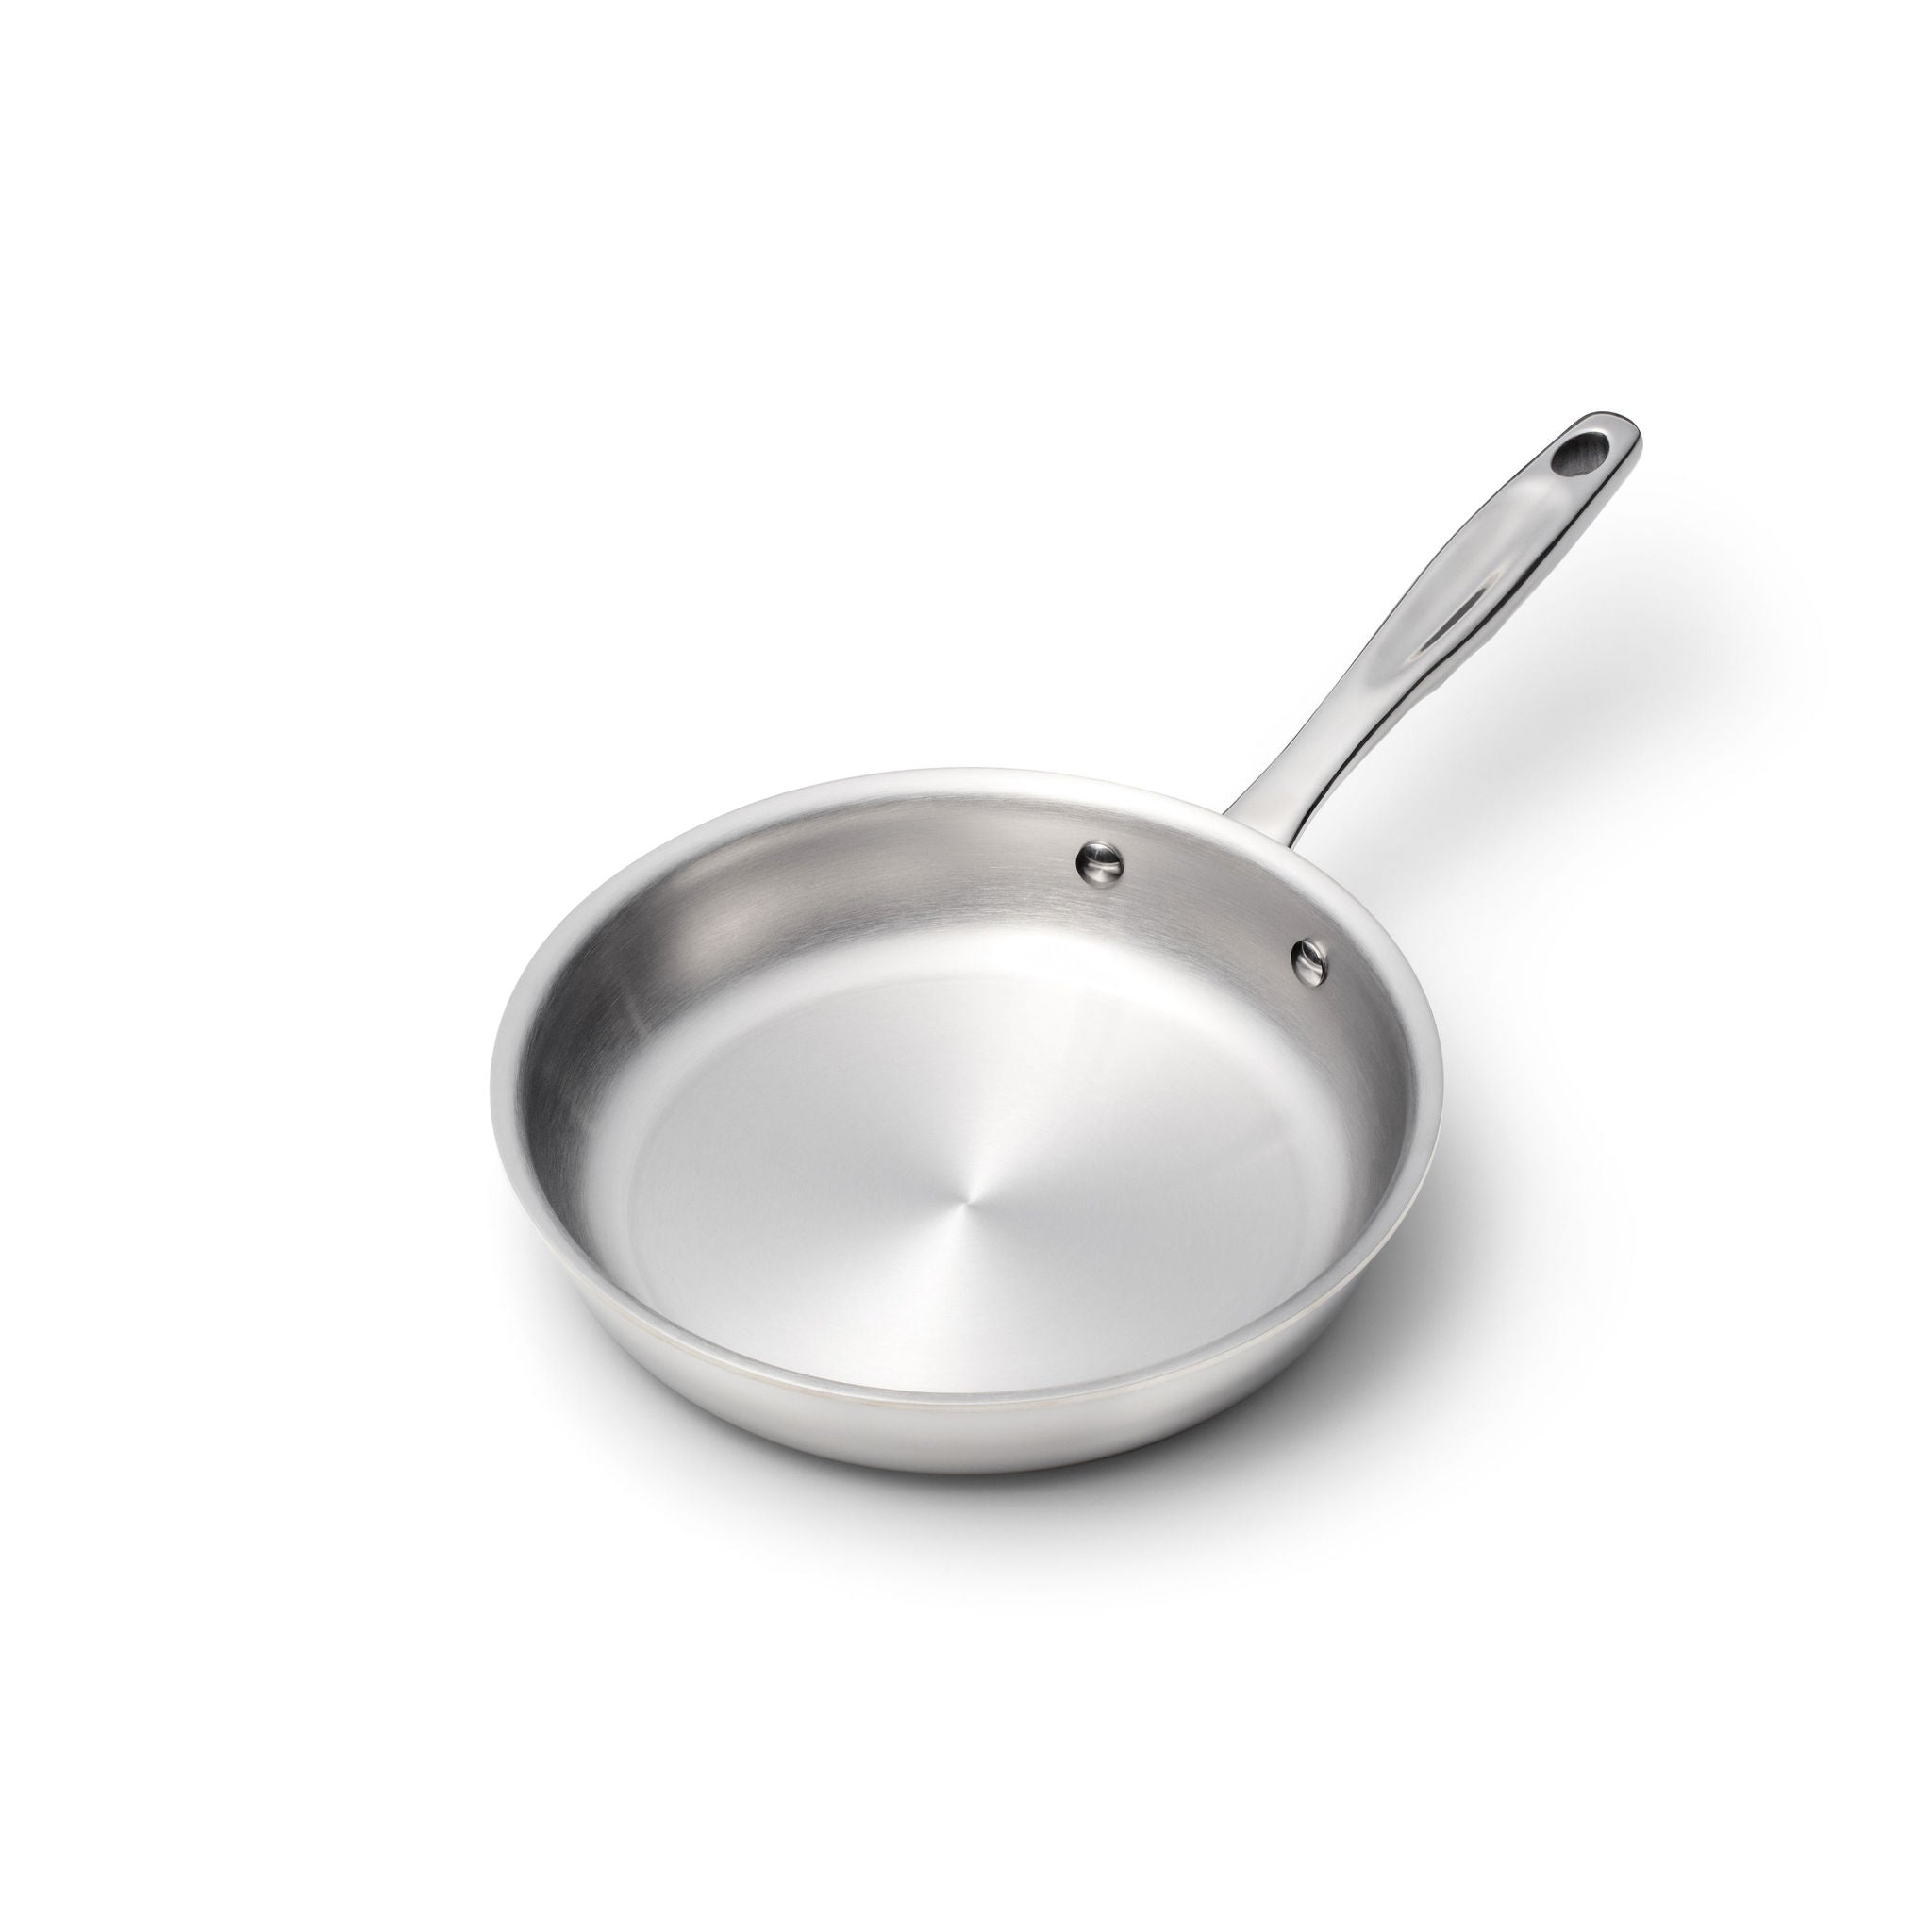 Mini Frying Pan, Egg Pan - 4 Inches - Stainless Steel - Great to Display Appeti